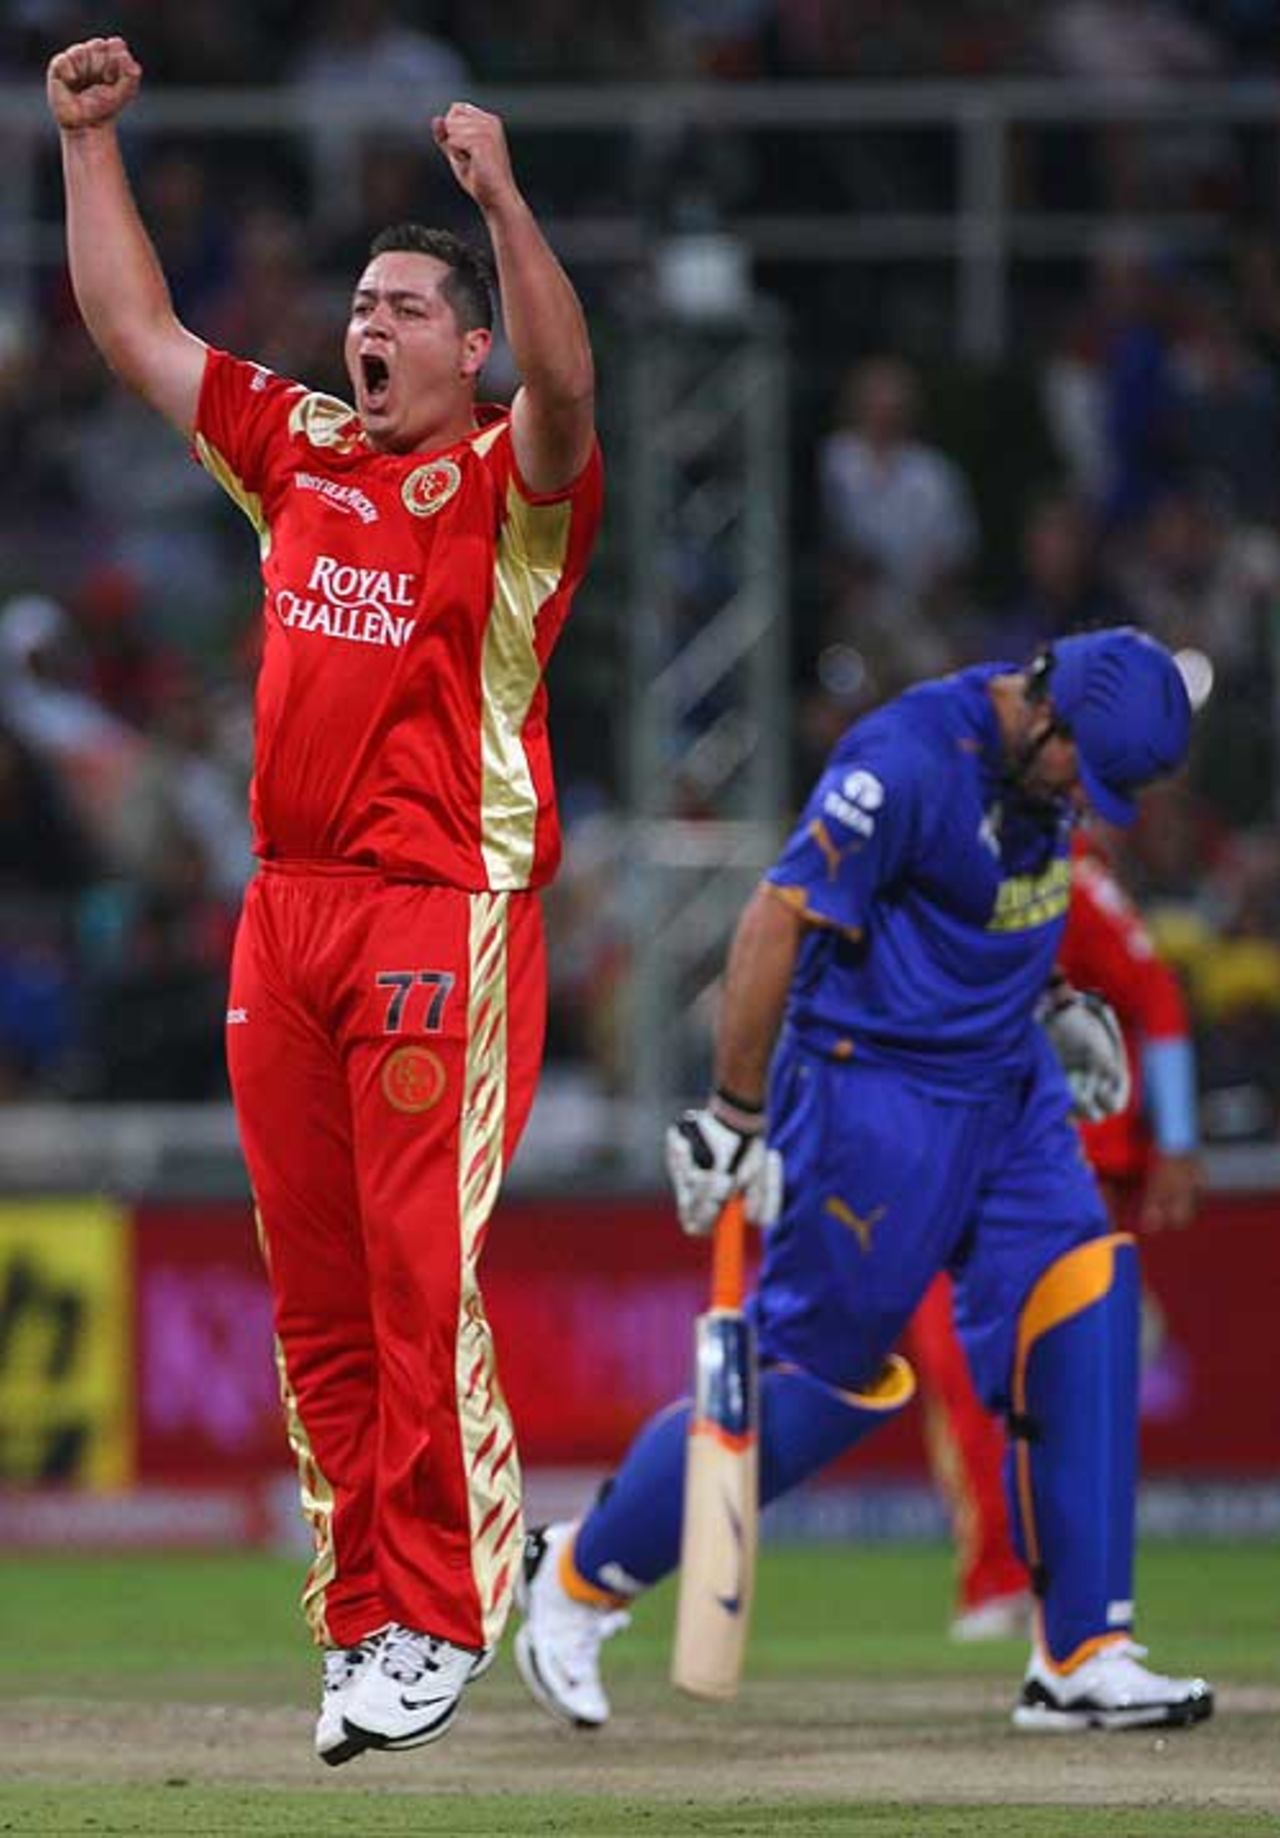 Jesse Ryder picked up two wickets, Bangalore Royal Challenger v Rajasthan Royals IPL, 2nd game, Cape Town, April 18, 2009